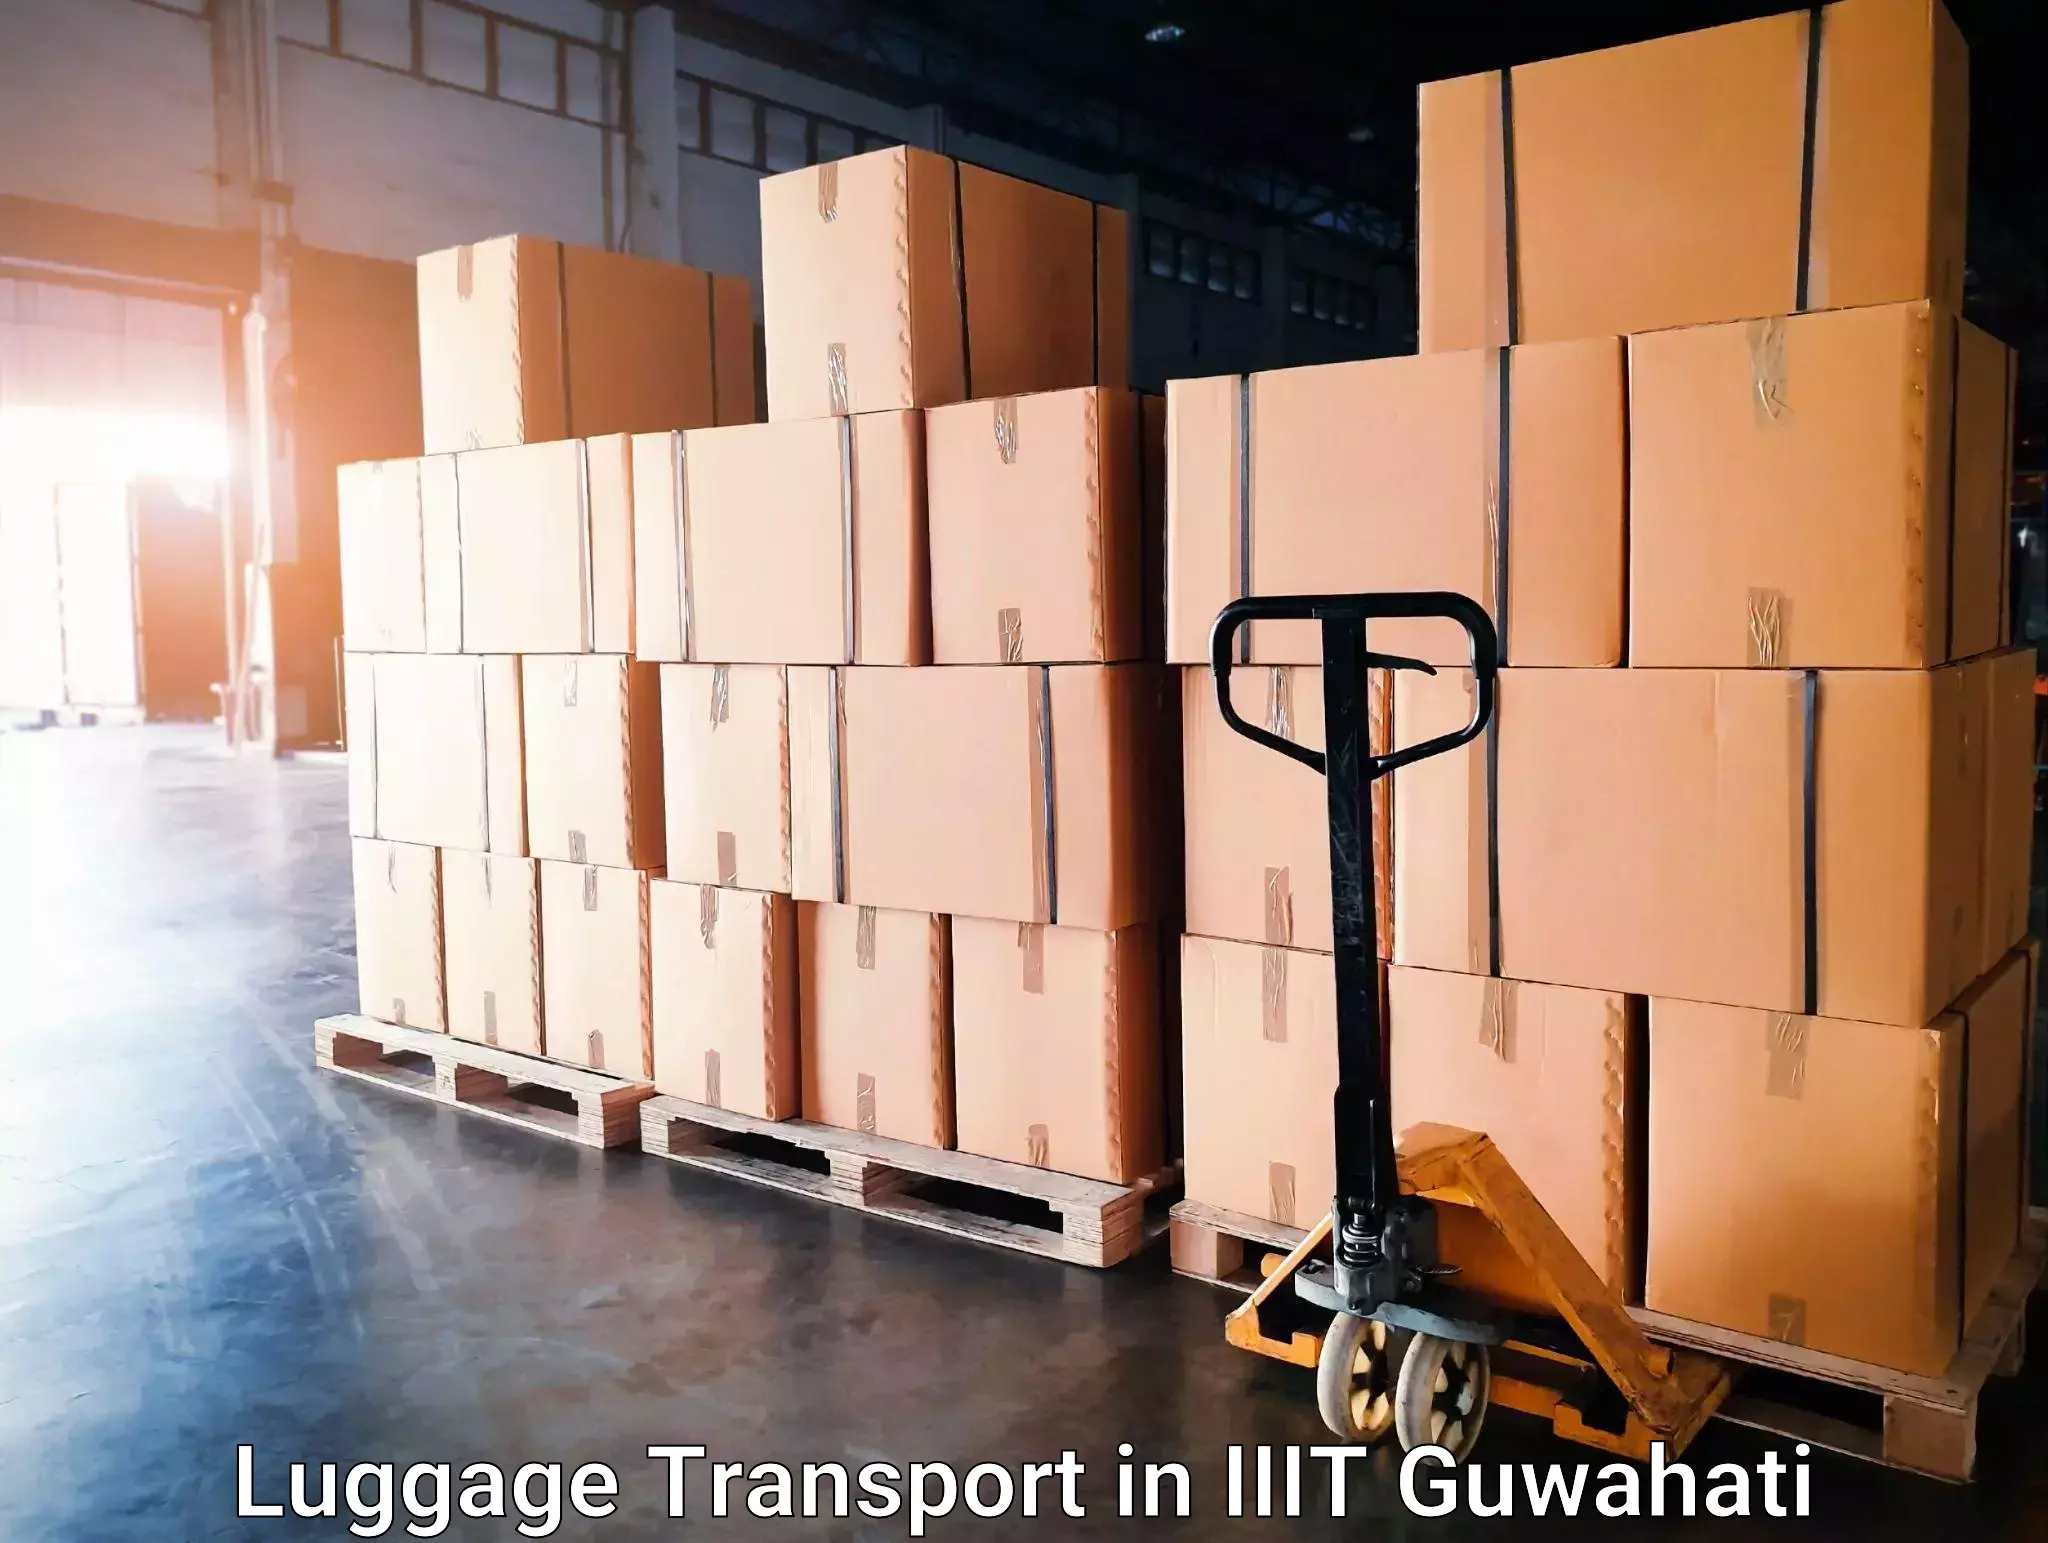 Baggage relocation service in IIIT Guwahati